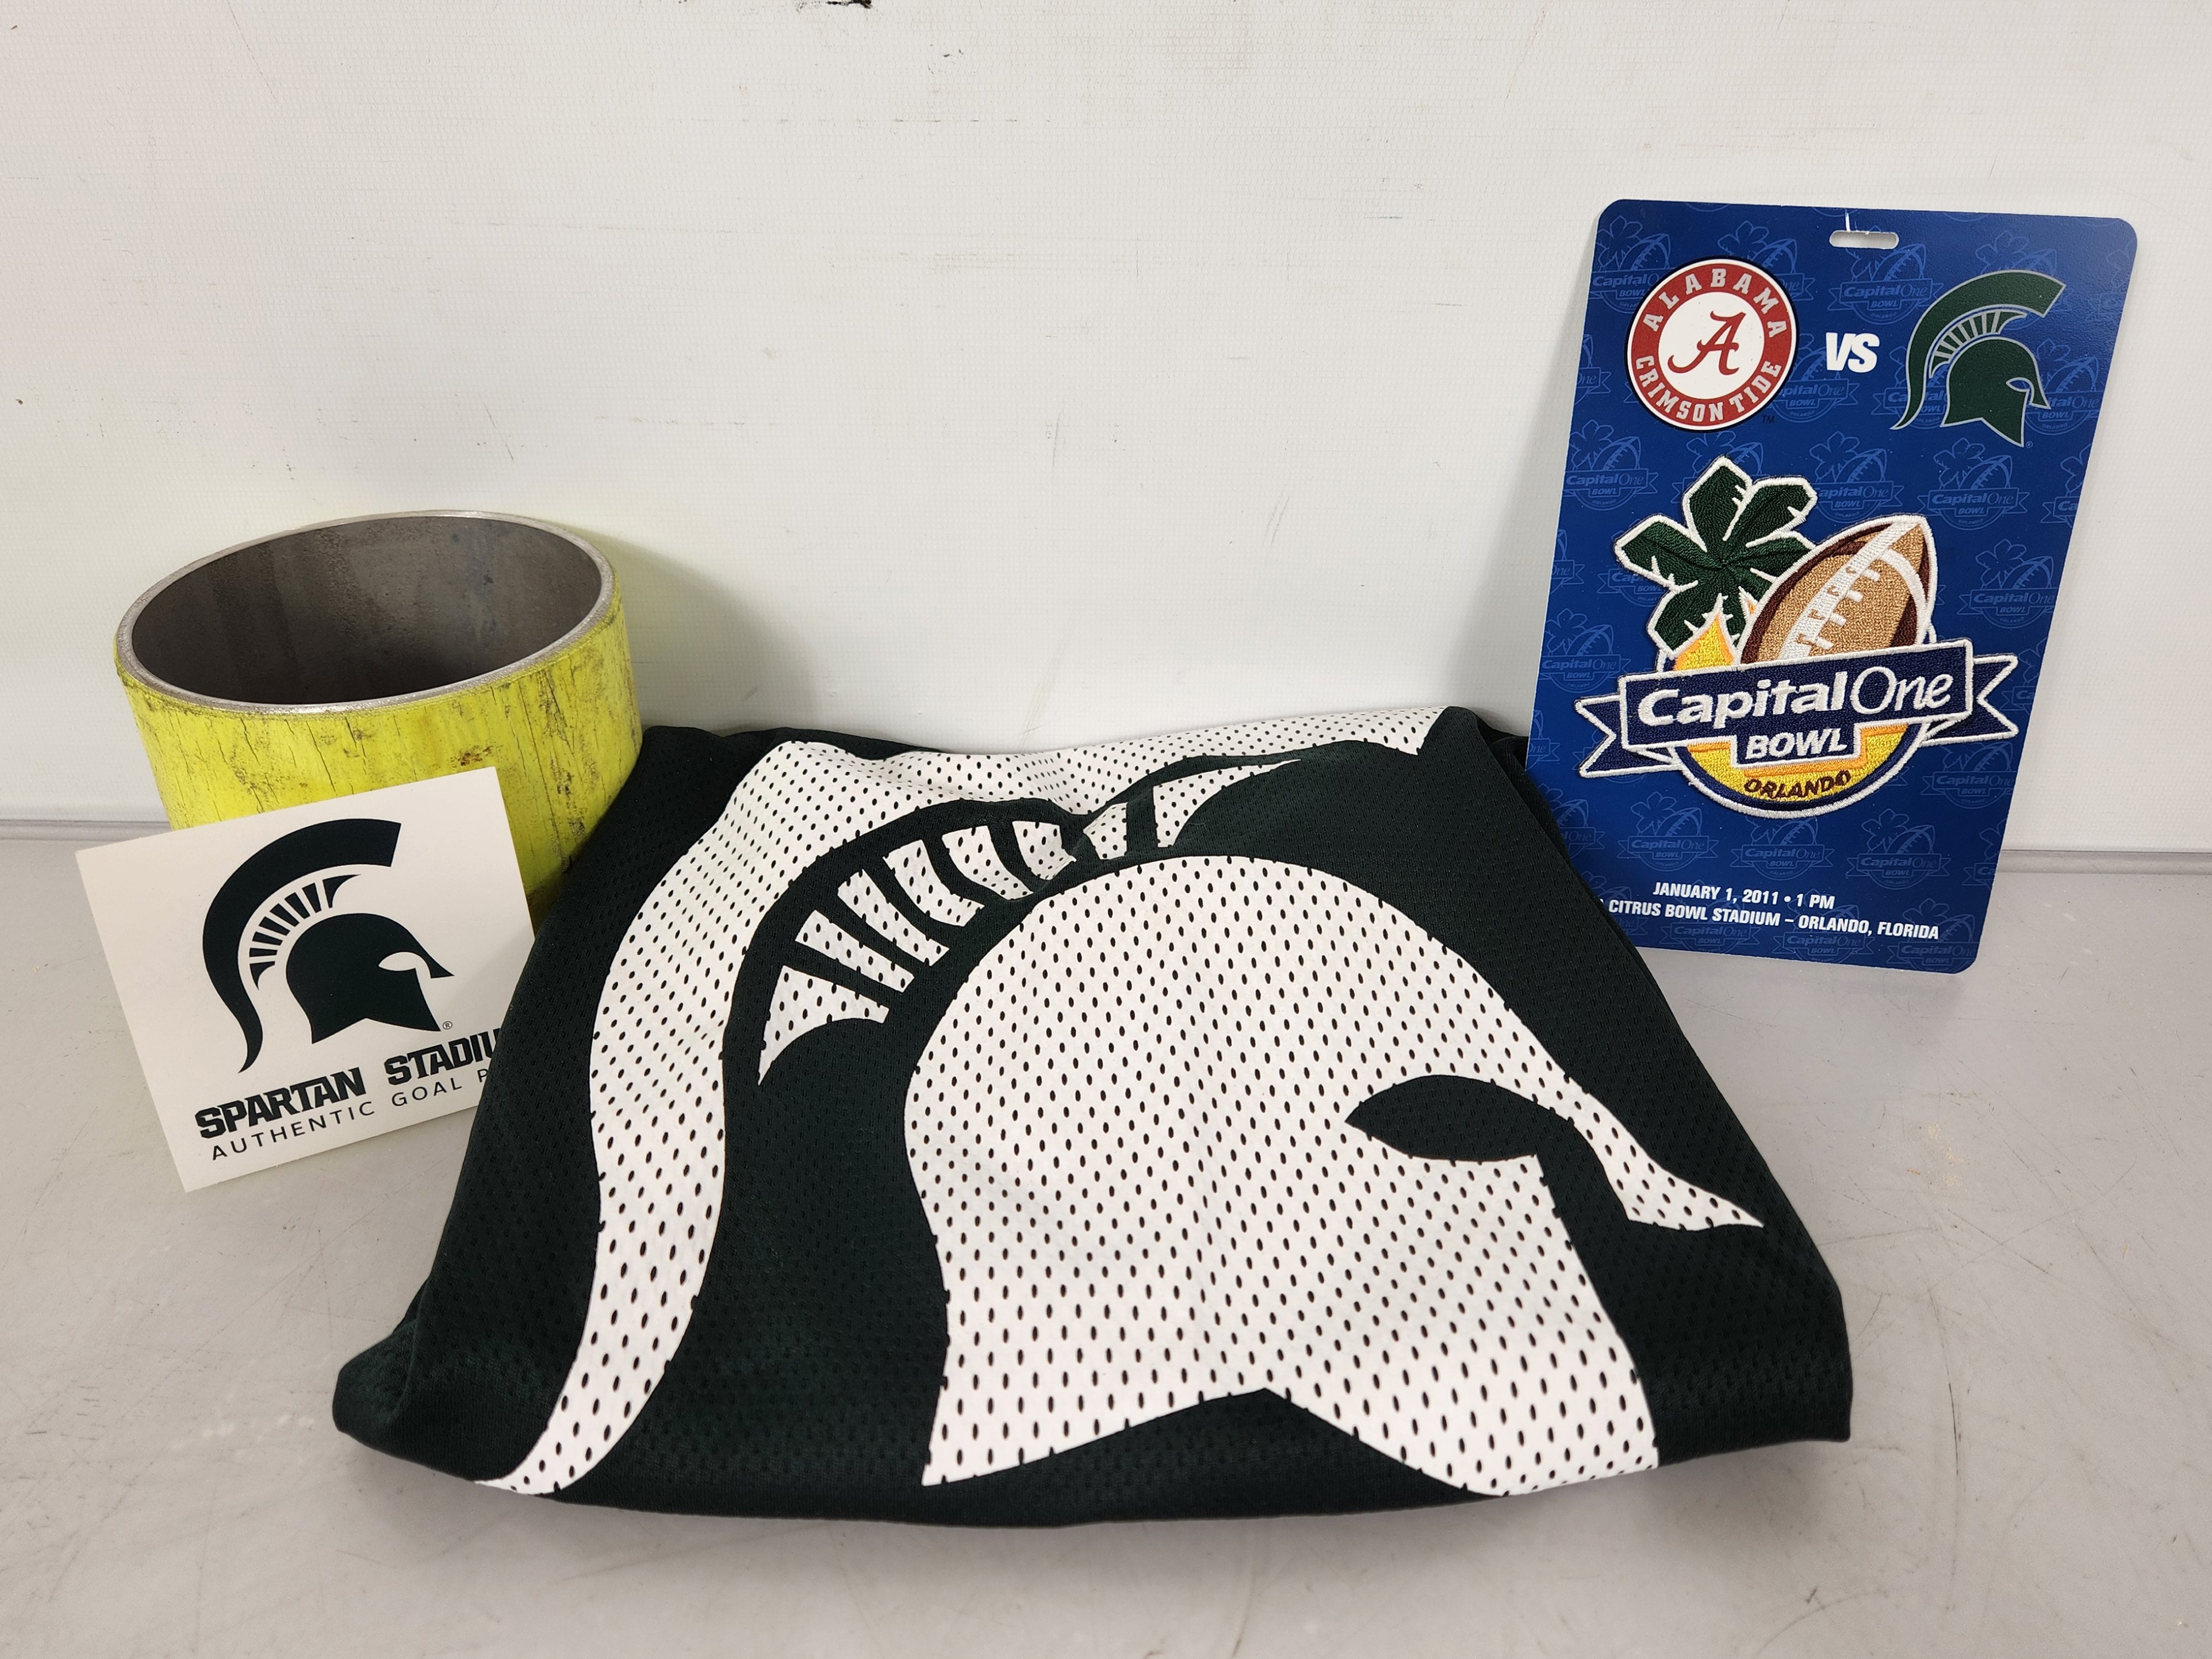 Bundle #43 Goal Post Cup with Men's Long Sleeve T-Shirt Size XS and Capital One Bowl Patch